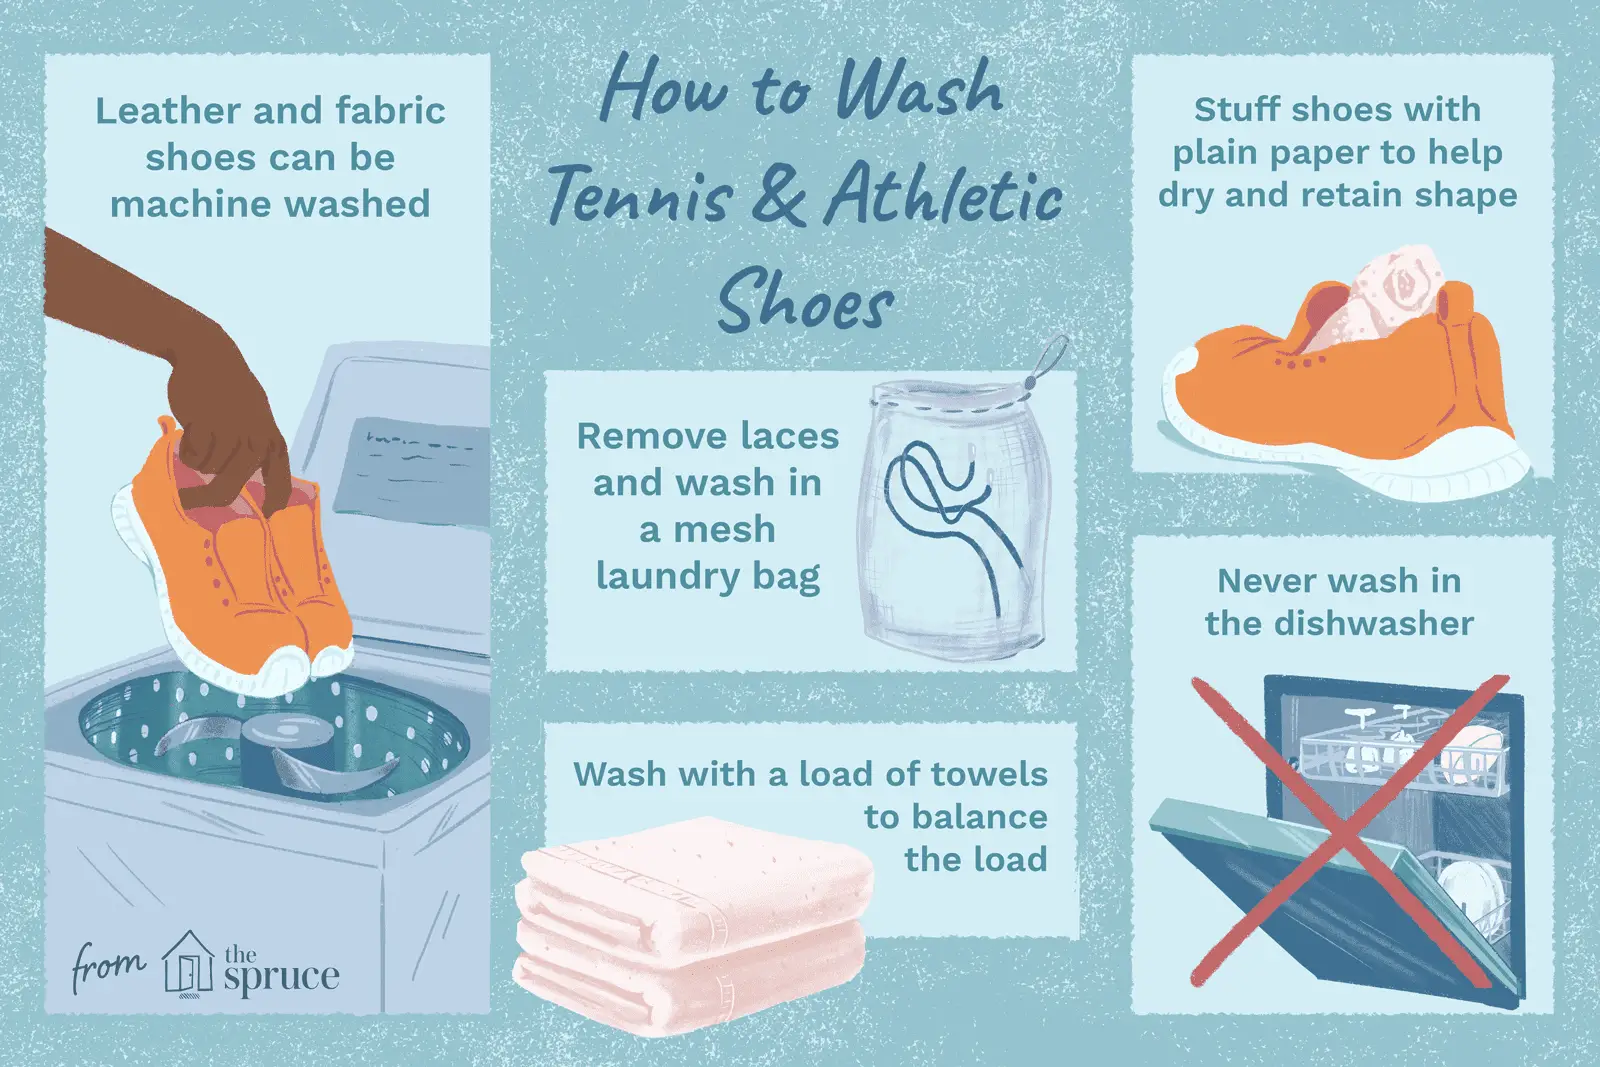 How to Wash Tennis and Athletic Shoes